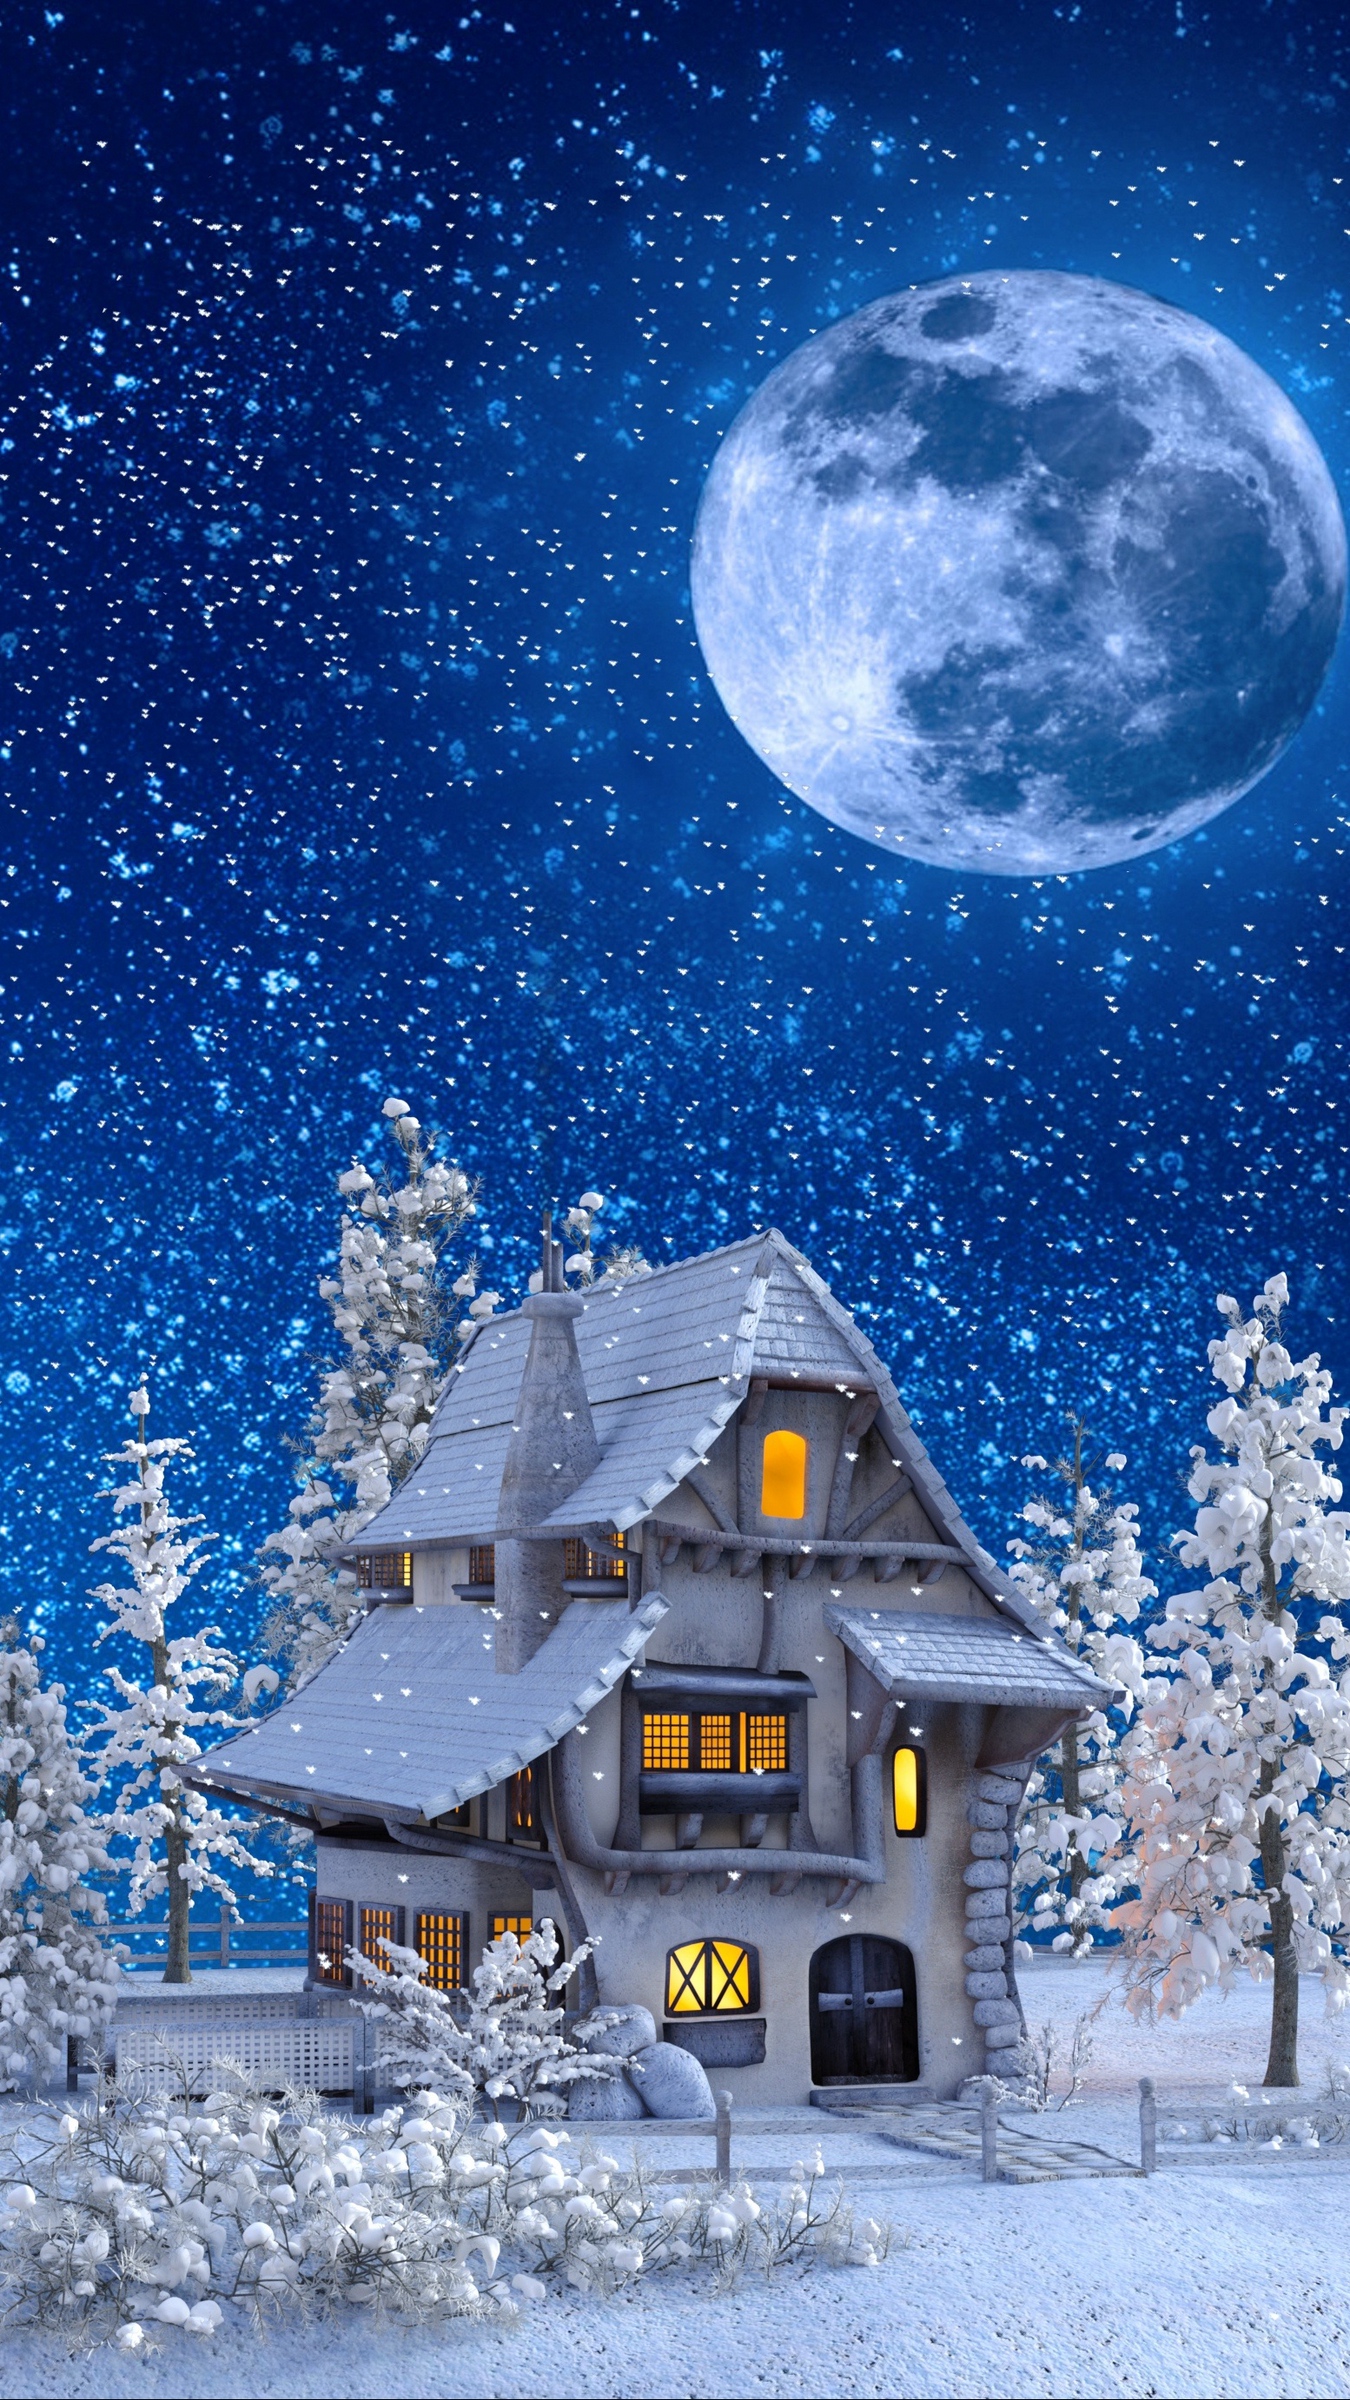 Download wallpaper 1350x2400 houses, winter, snow, moon, toy